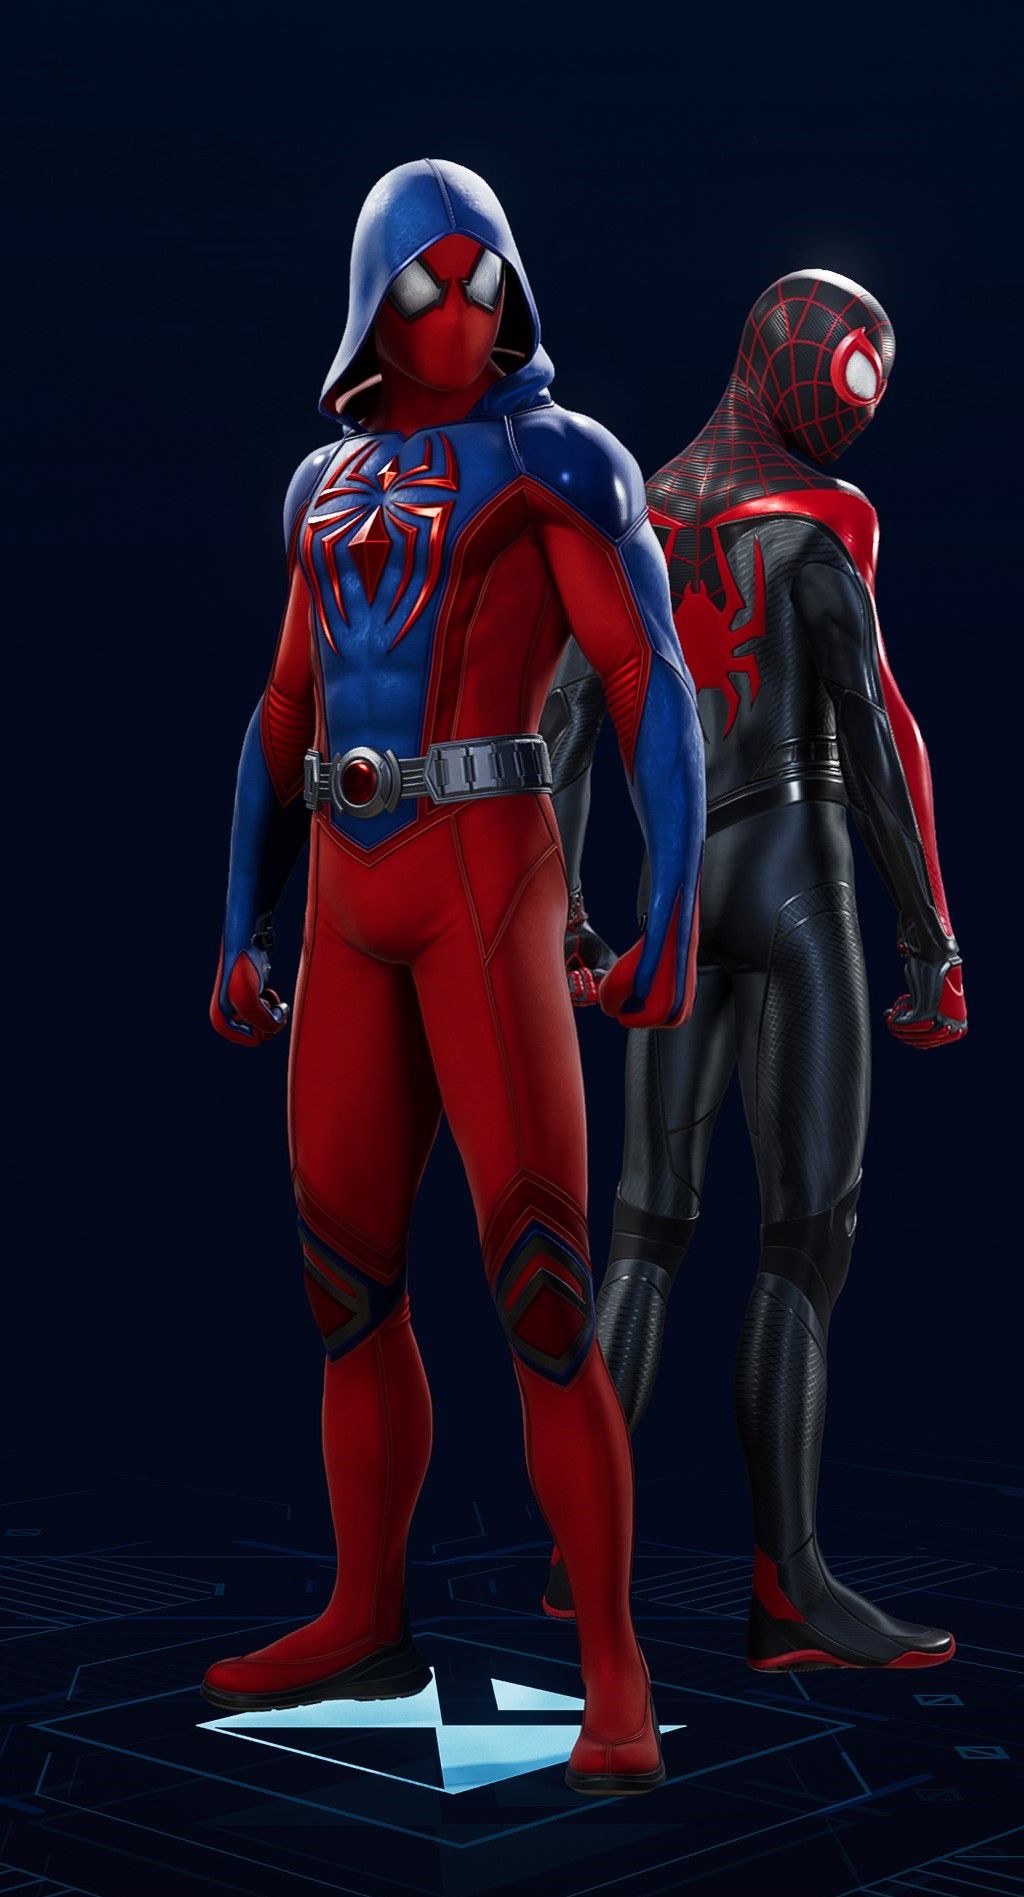 Peter Parker stands in his Scarlet III Suit in the suit selection screen of Spider-Man 2.